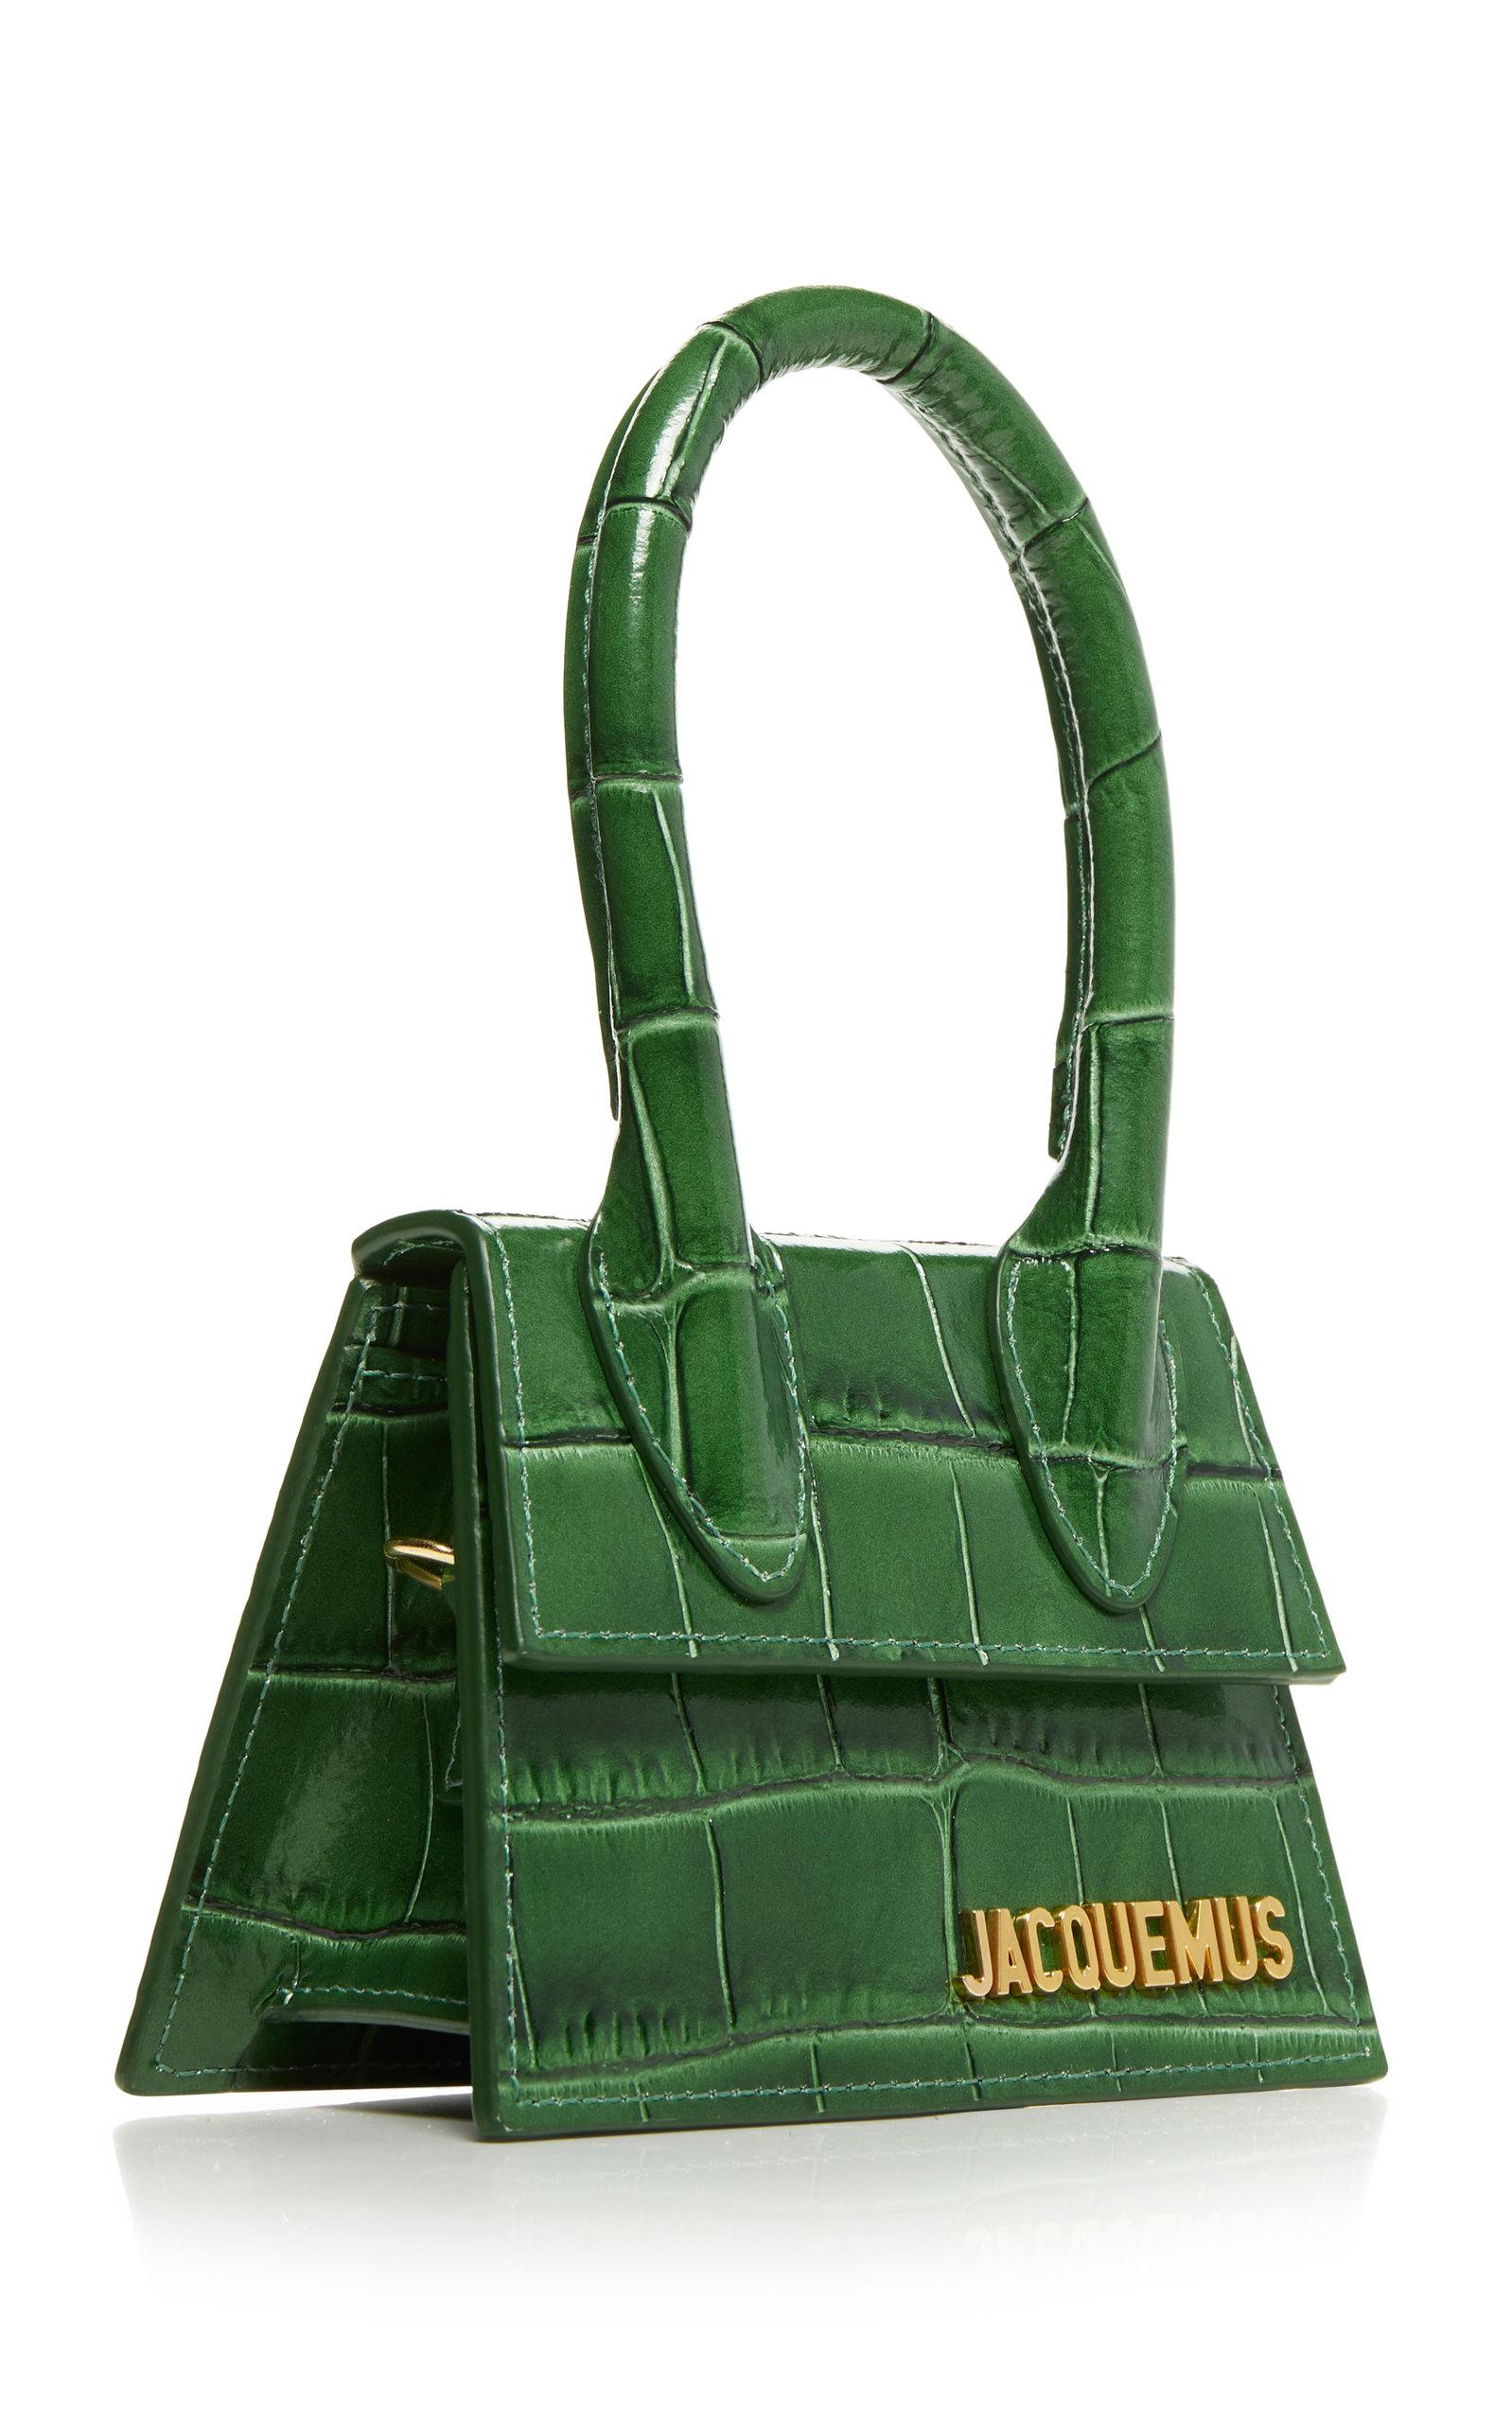 Jacquemus Le Chiquito Leather Mini Bag in Green - Lyst